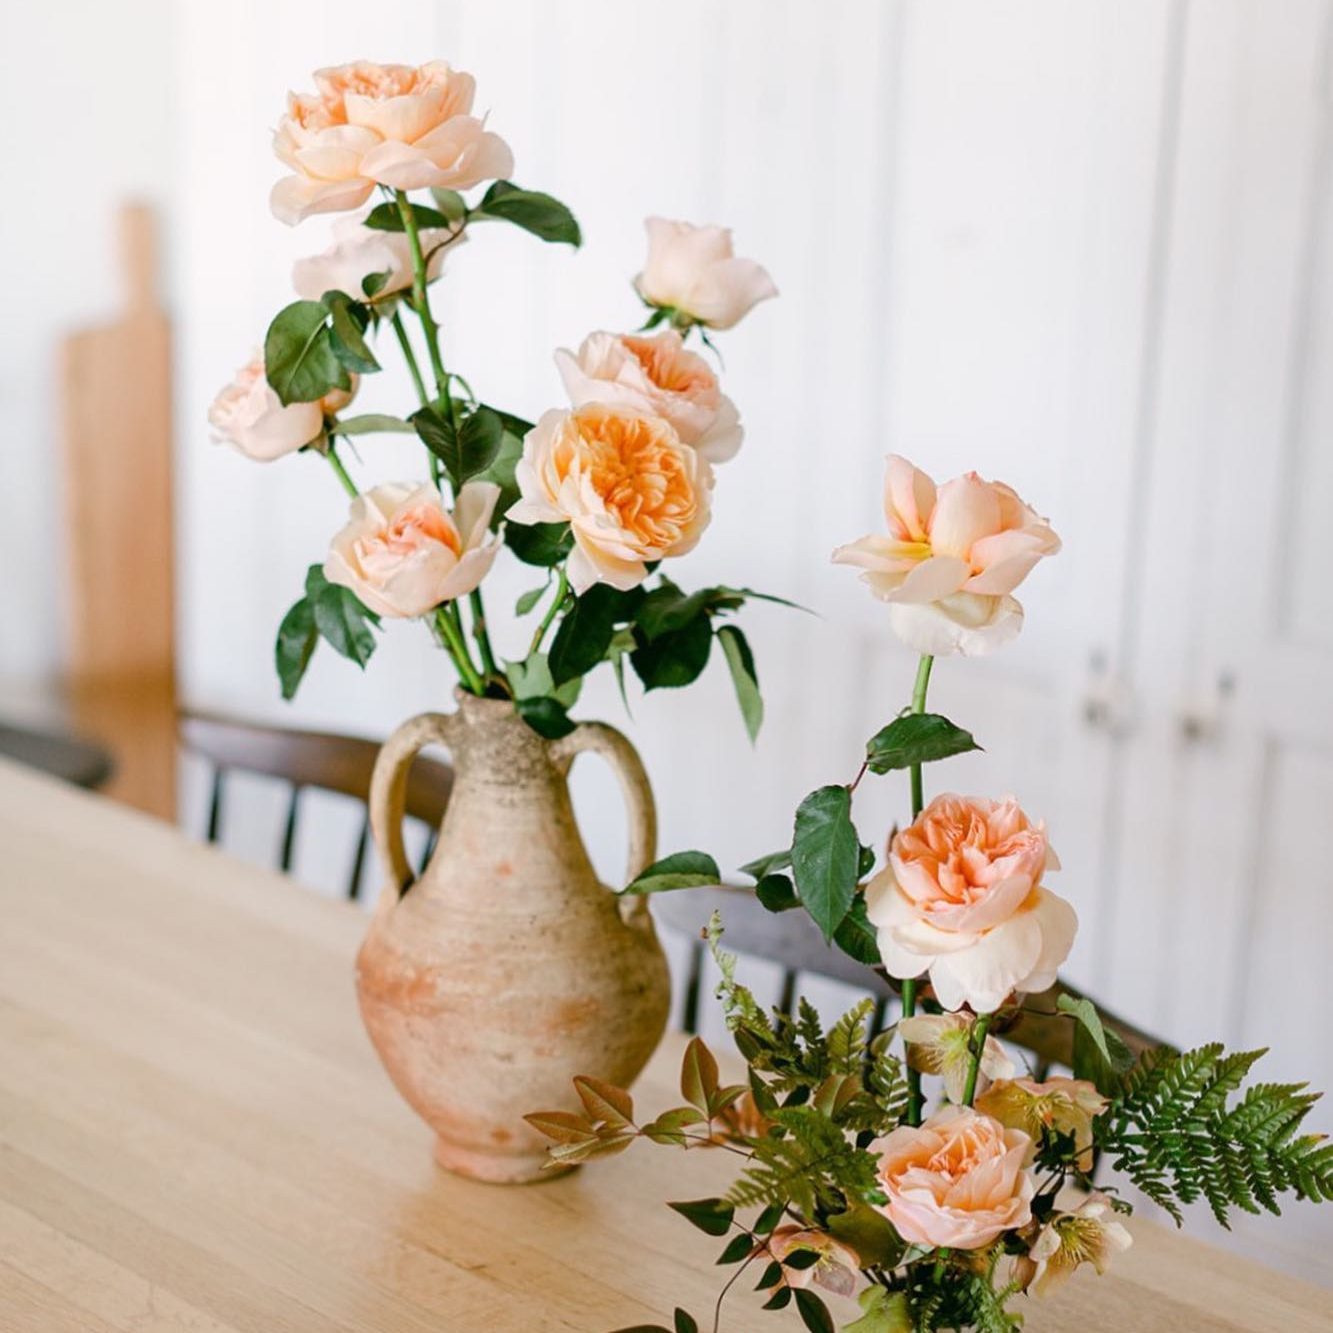 15 Floral Candles Centerpieces with Peony Flowers